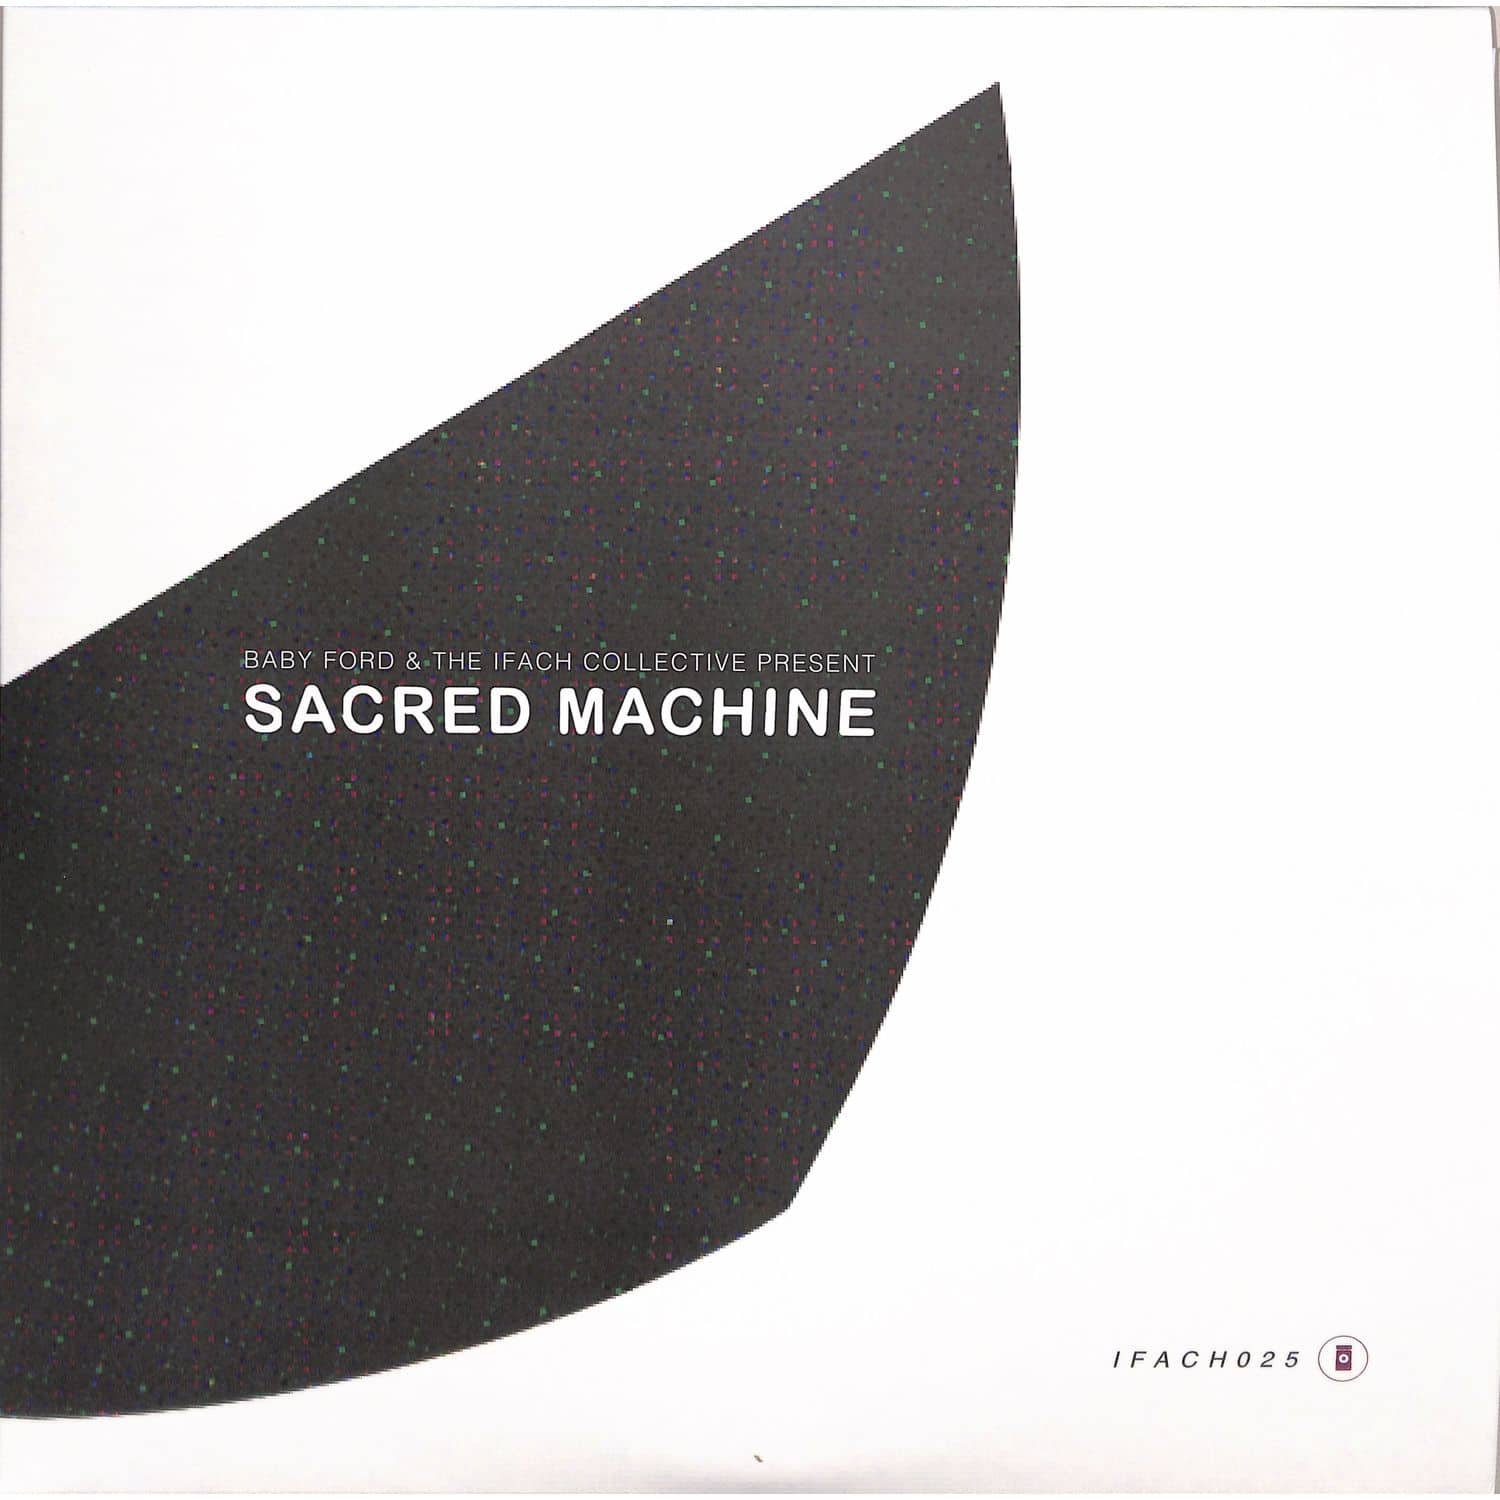 Baby Ford & The Ifach Collective - SACRED MACHINE 